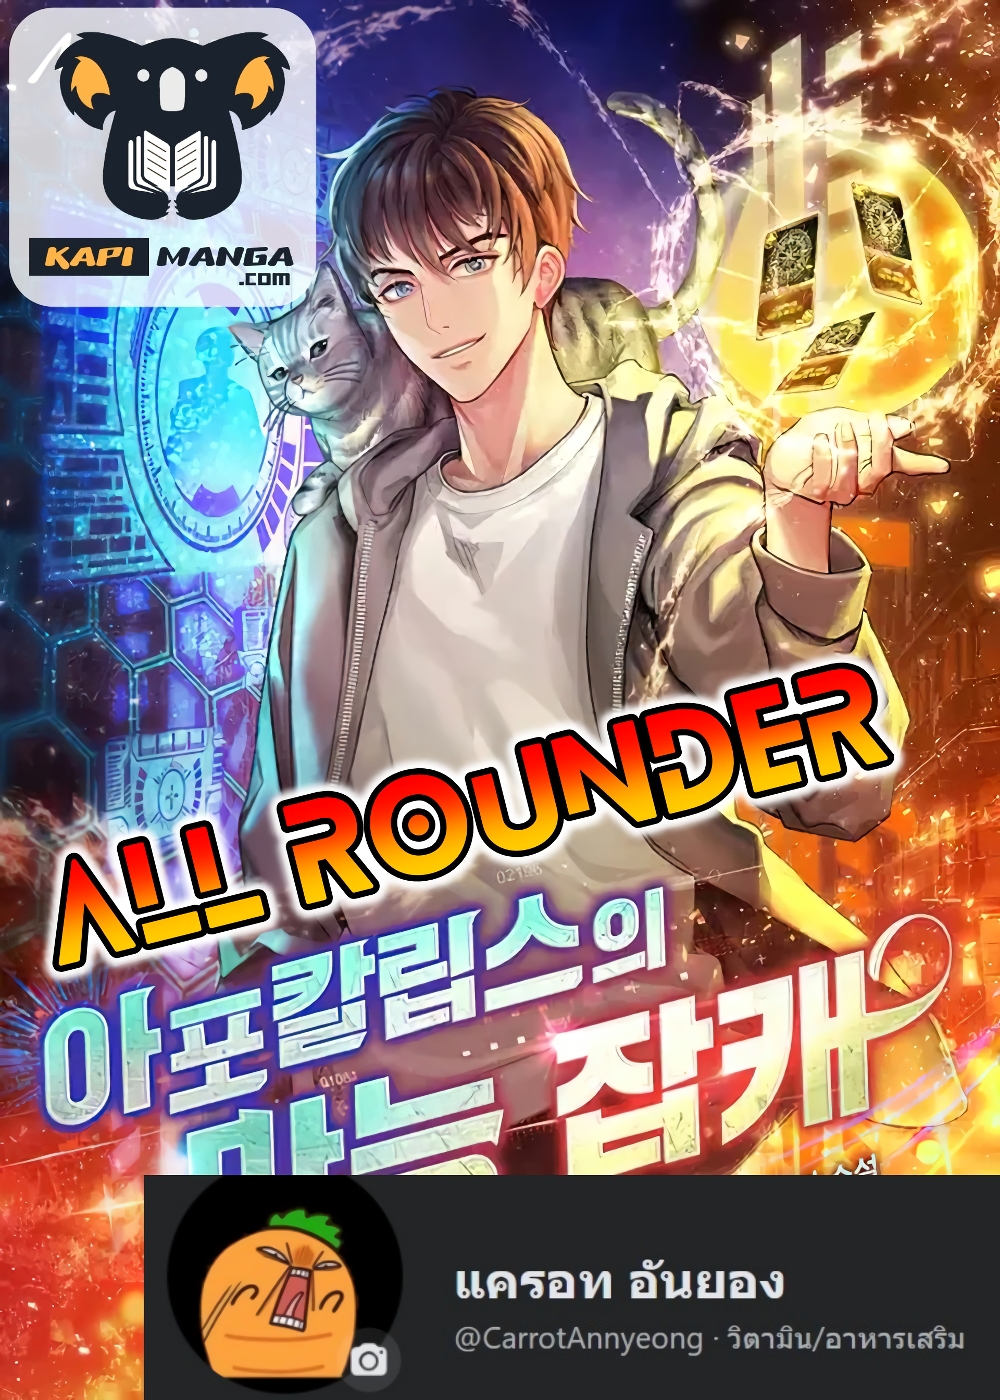 All Rounder28 (1)